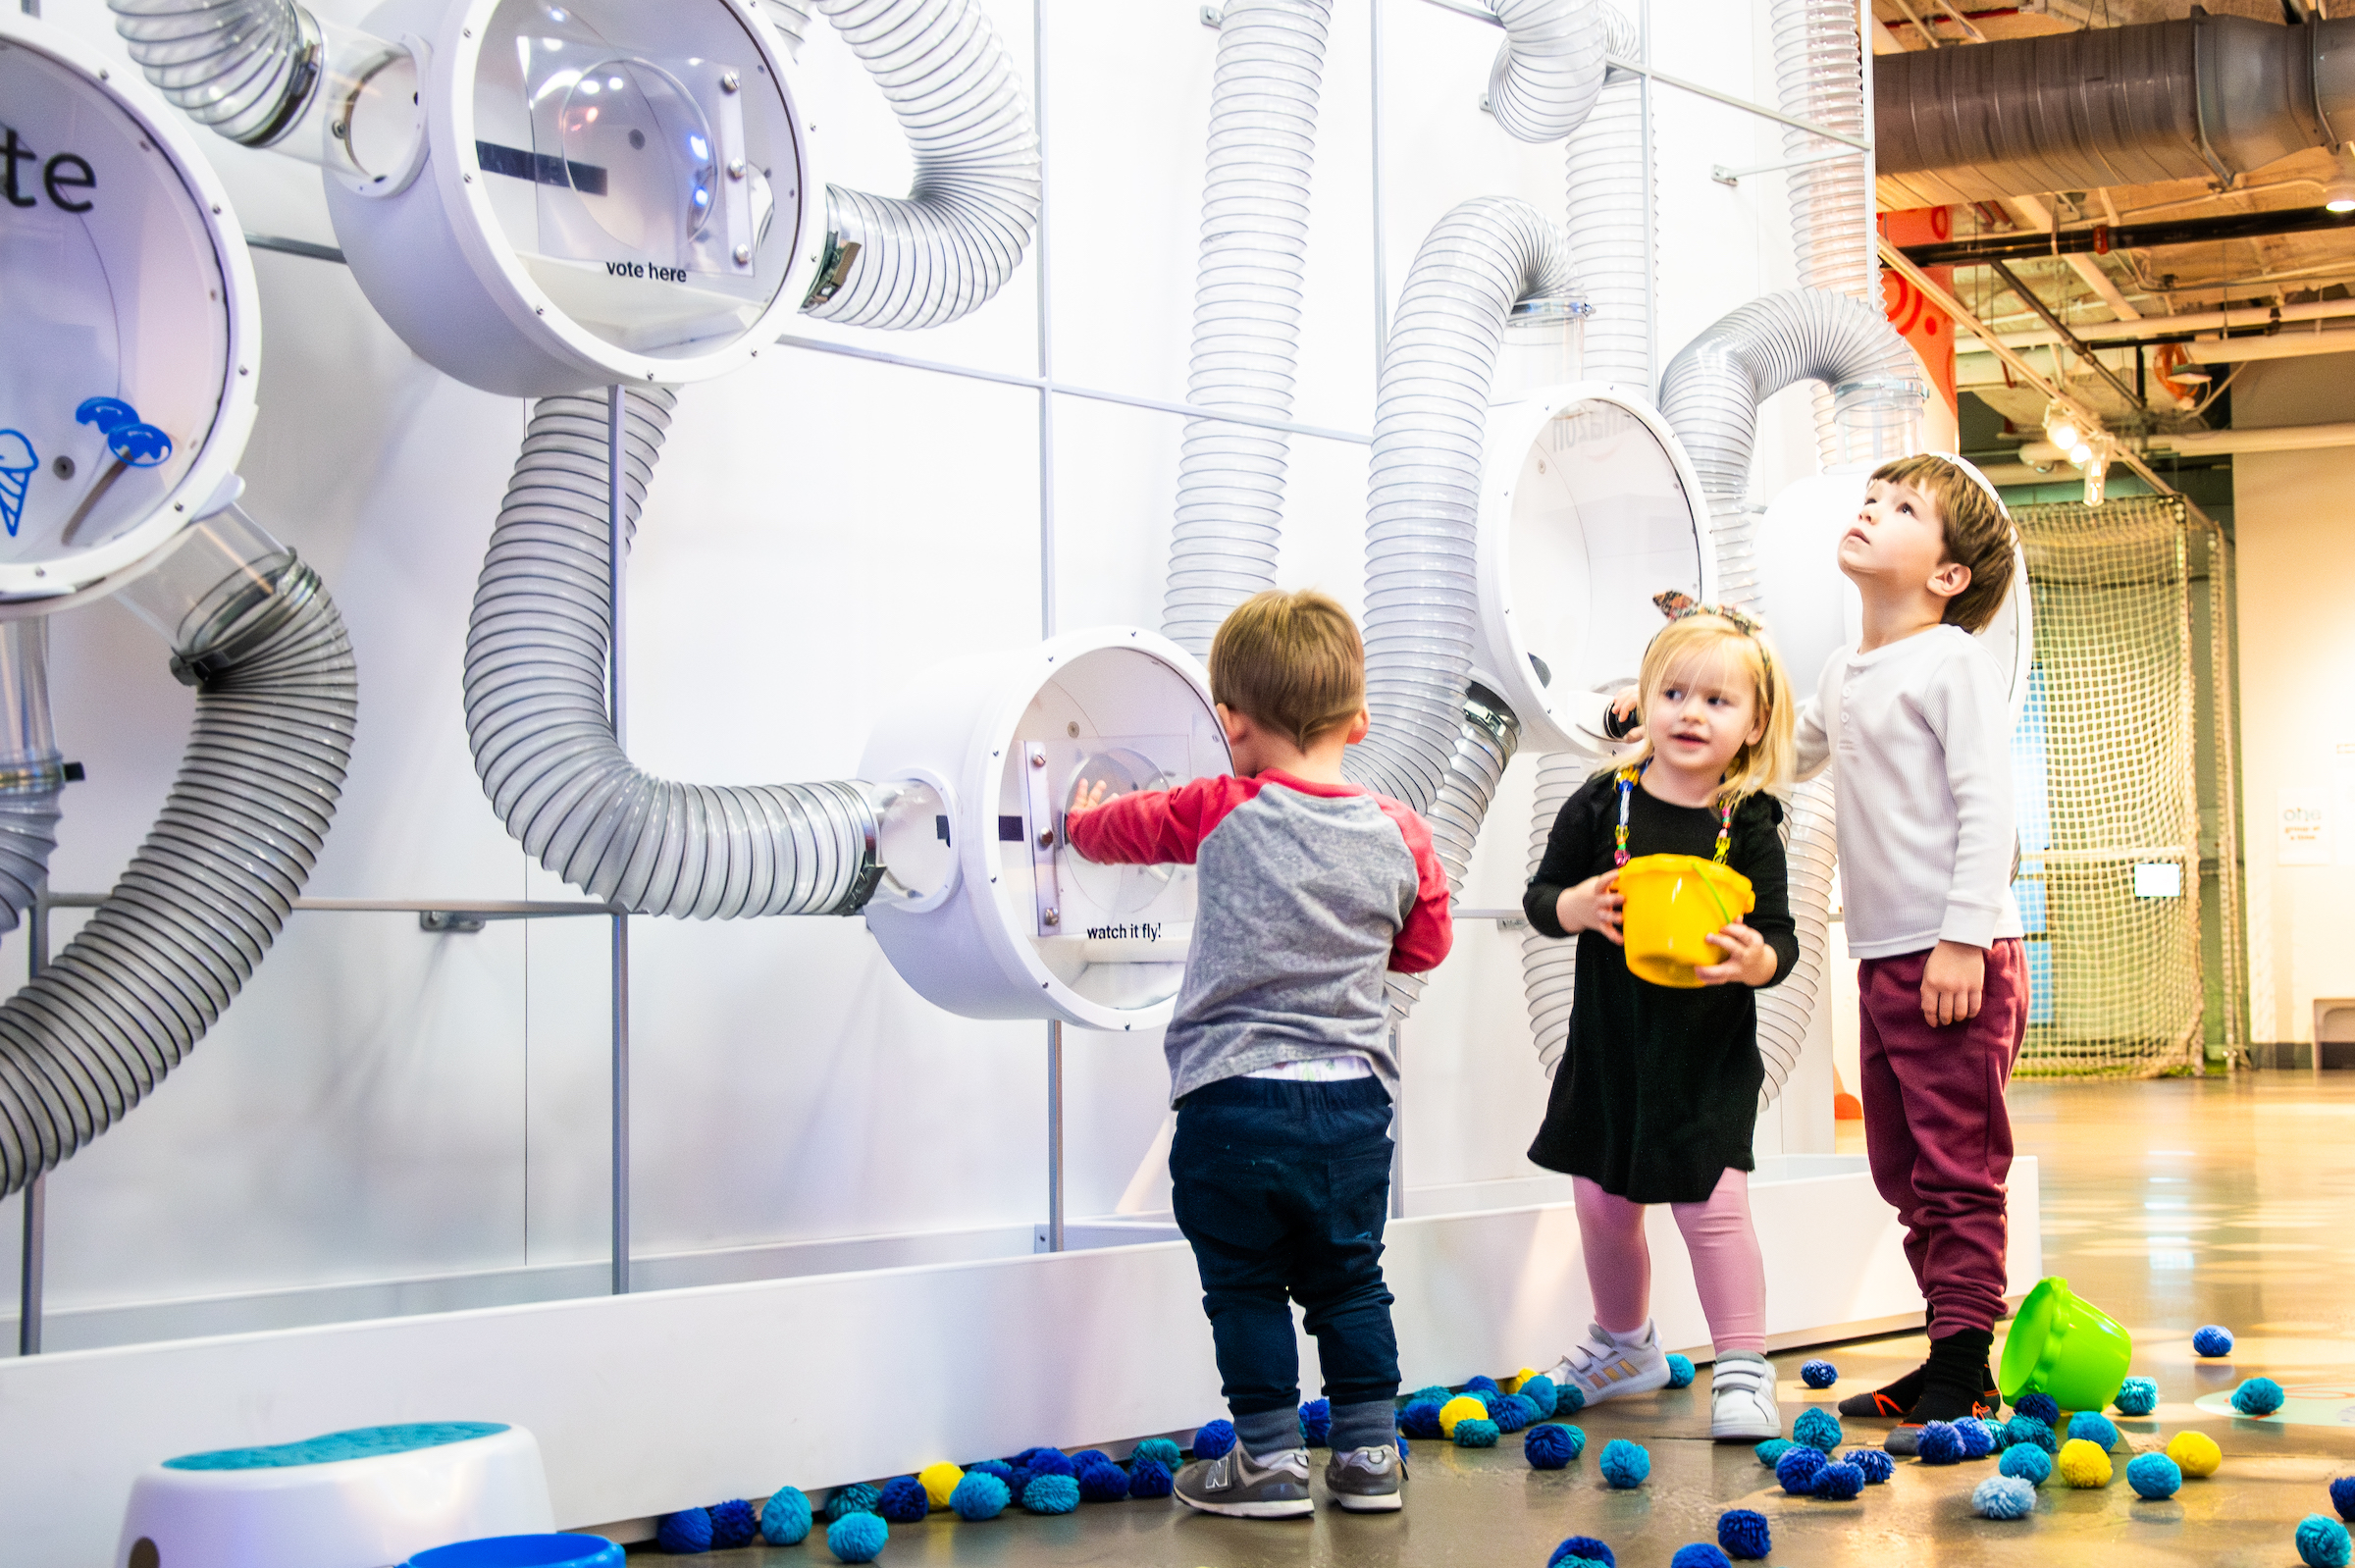 Children playing at the Pom Pom Poll experience in the Data Science Alley exhibit